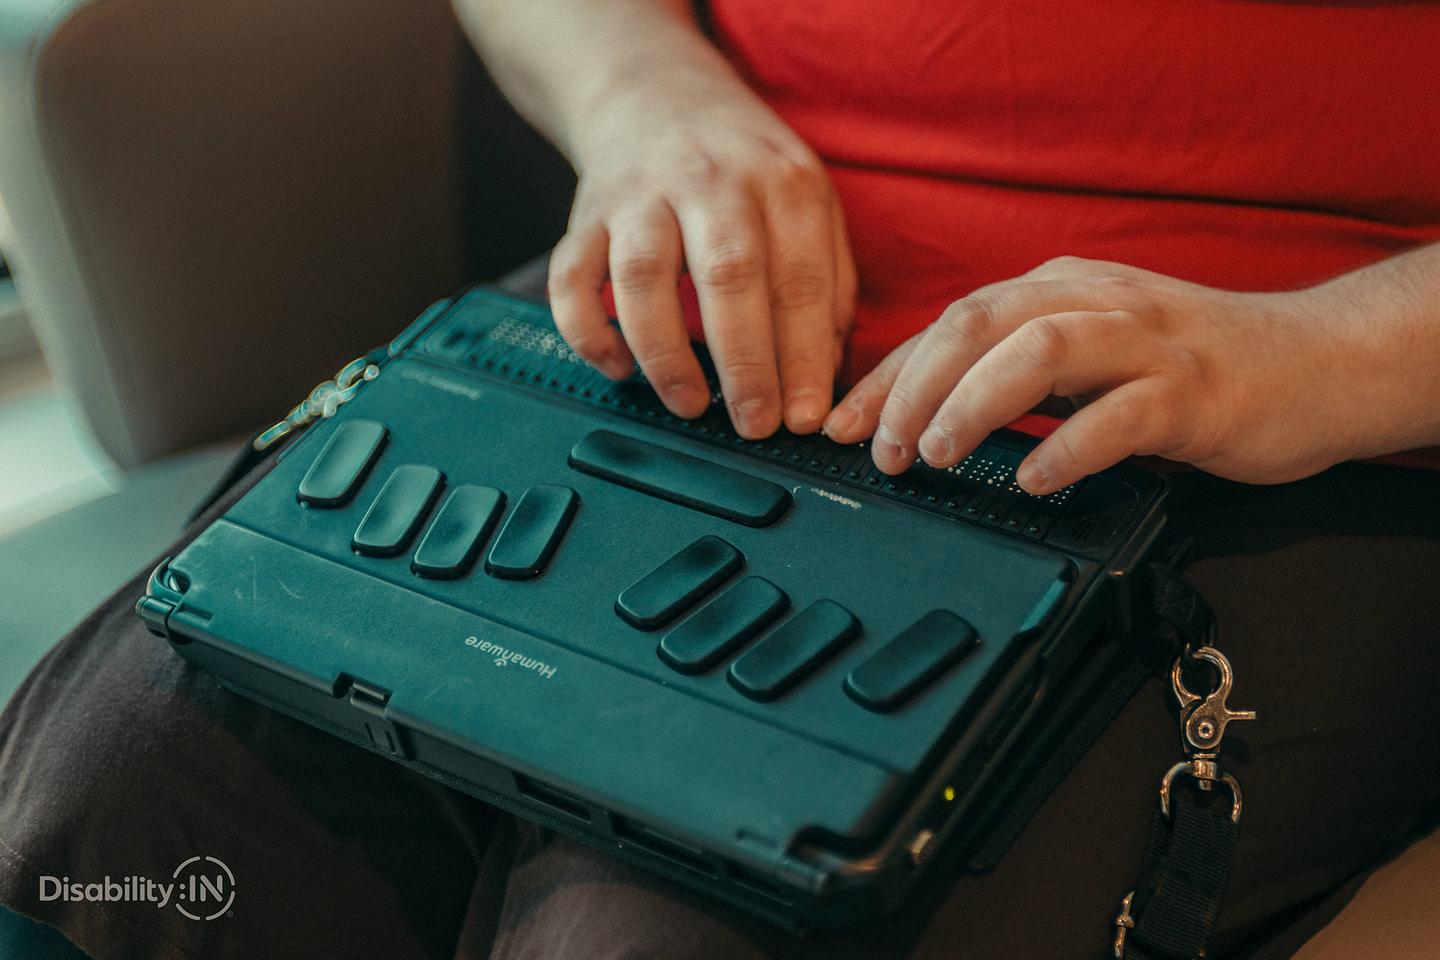 Photograph of a person using a braille-equipped accessibility device. Image credit: Disability:IN and Jordan Nicholson
Licensed under the Creative Commons Attribution-NoDerivatives 4.0 International (CC BY-ND 4.0) license.